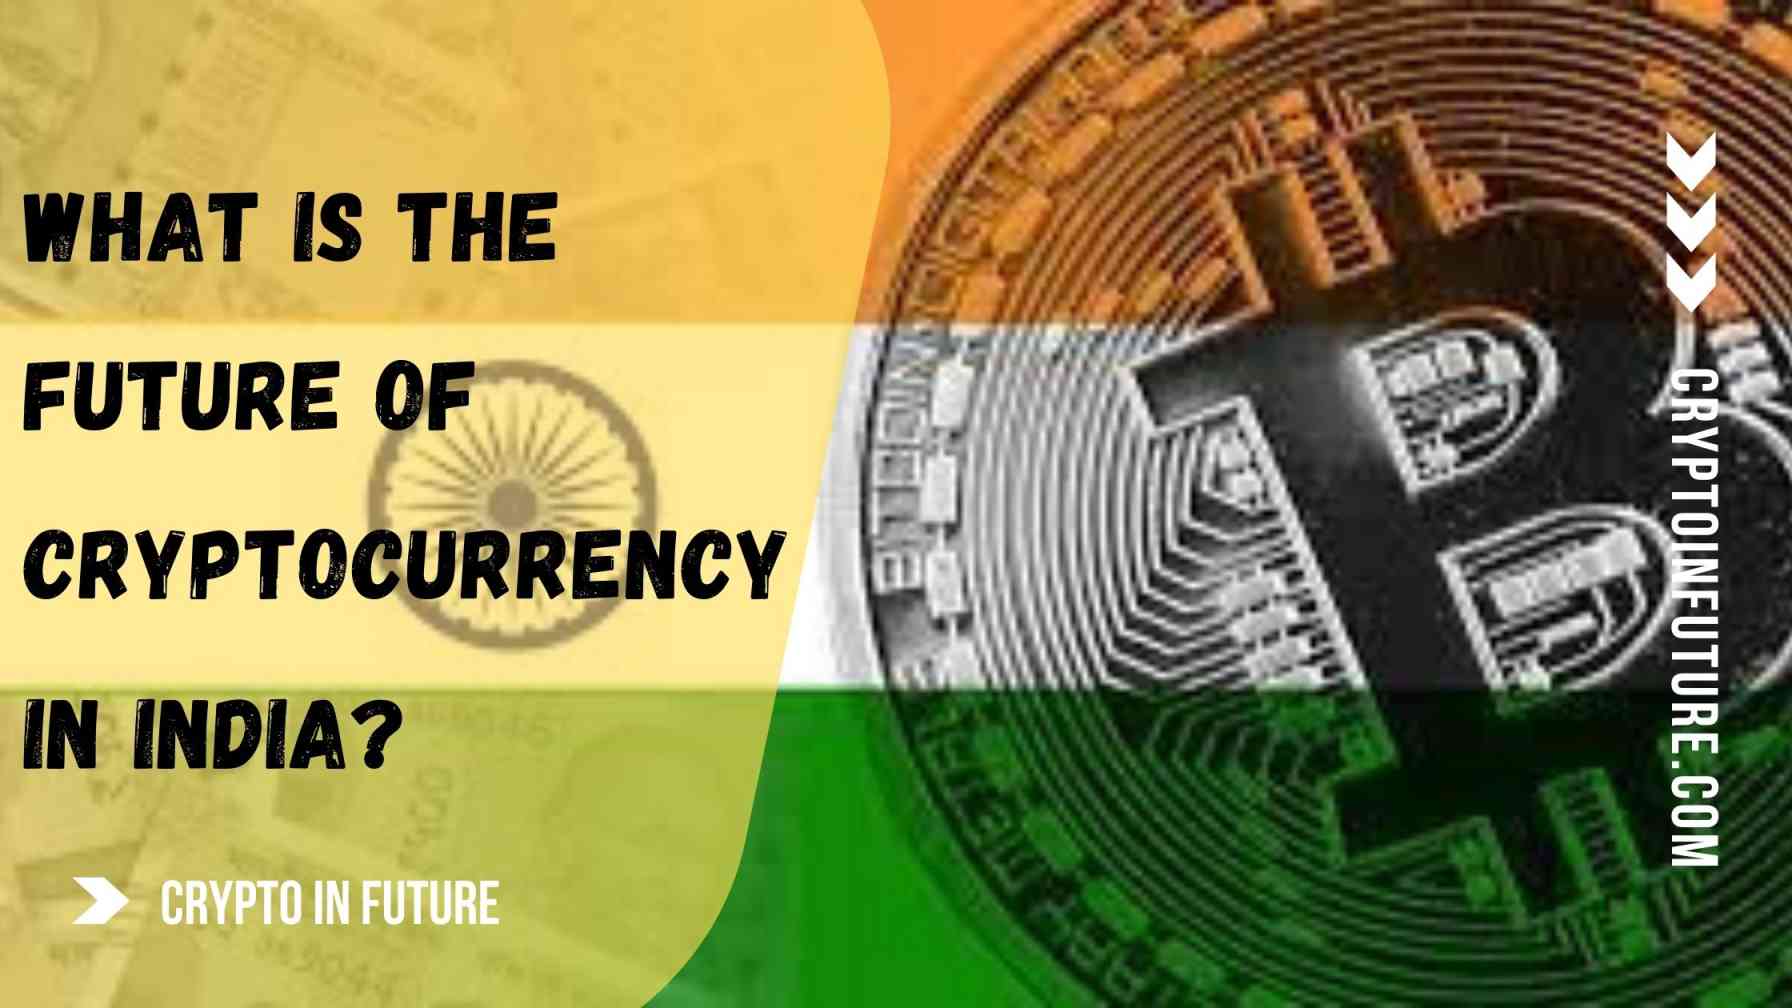 What Is The Future Of Cryptocurrency In India?